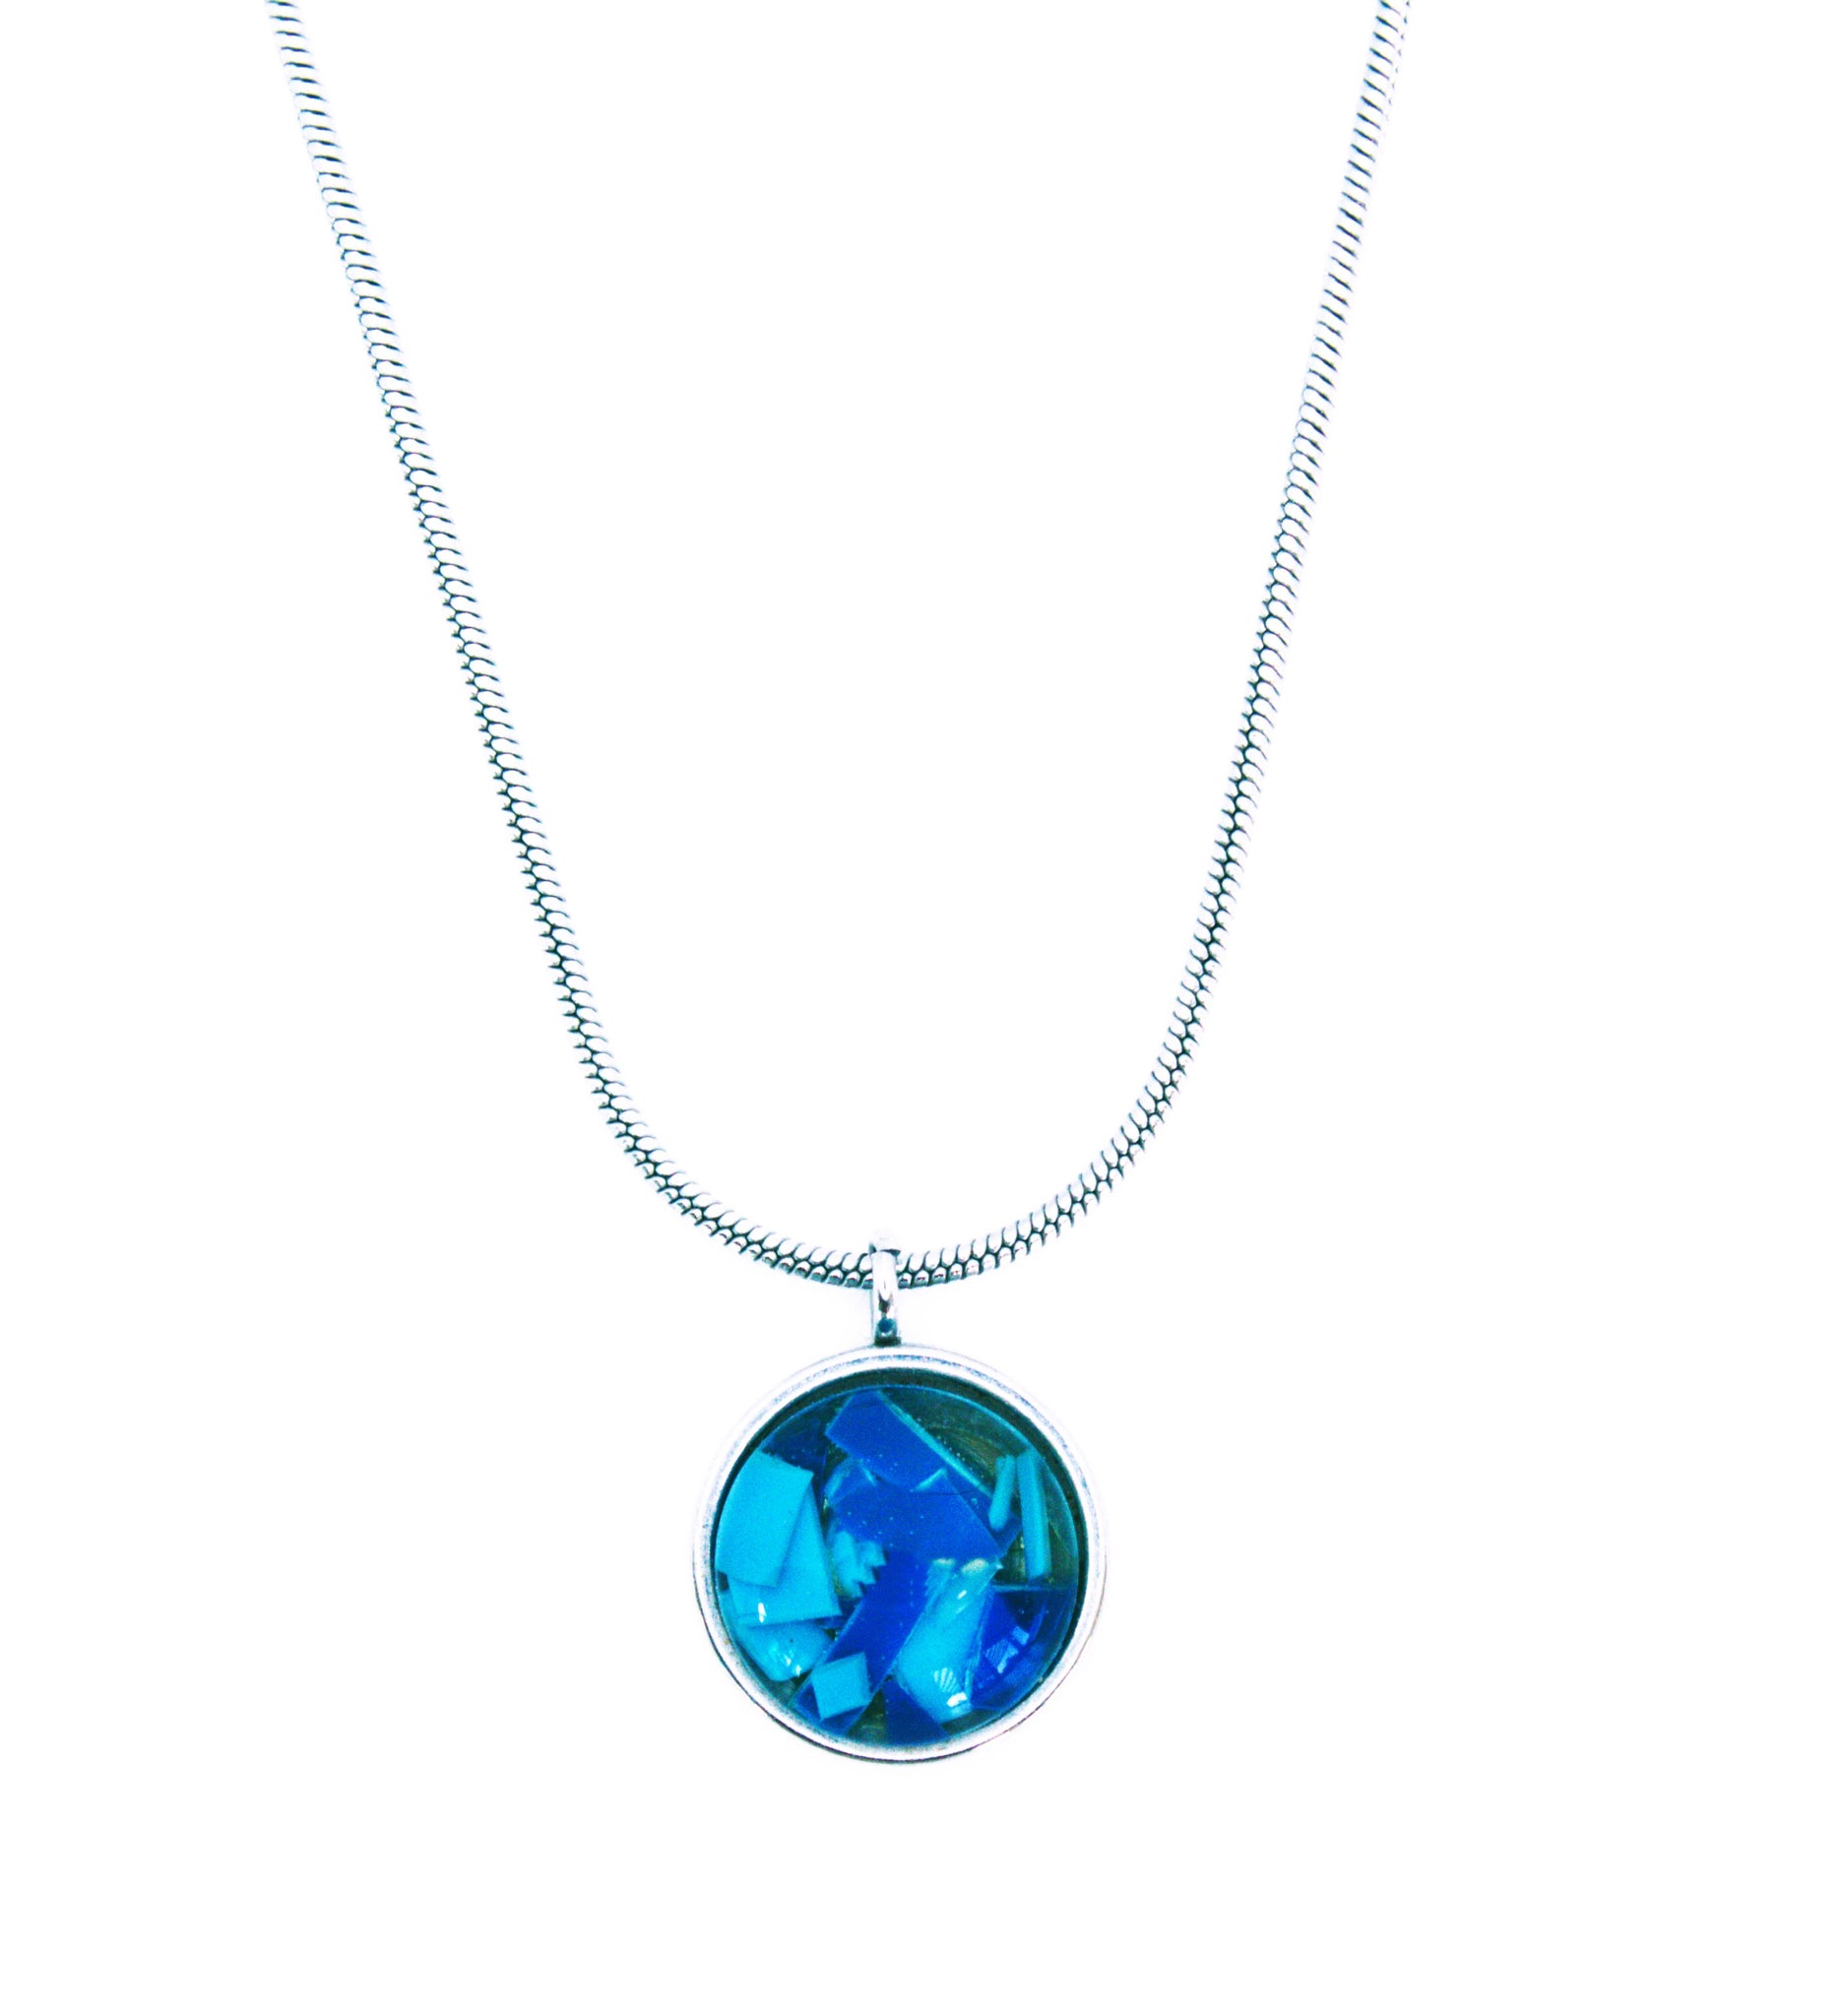 Necklace with a steel pendant setting of Ocean plastic